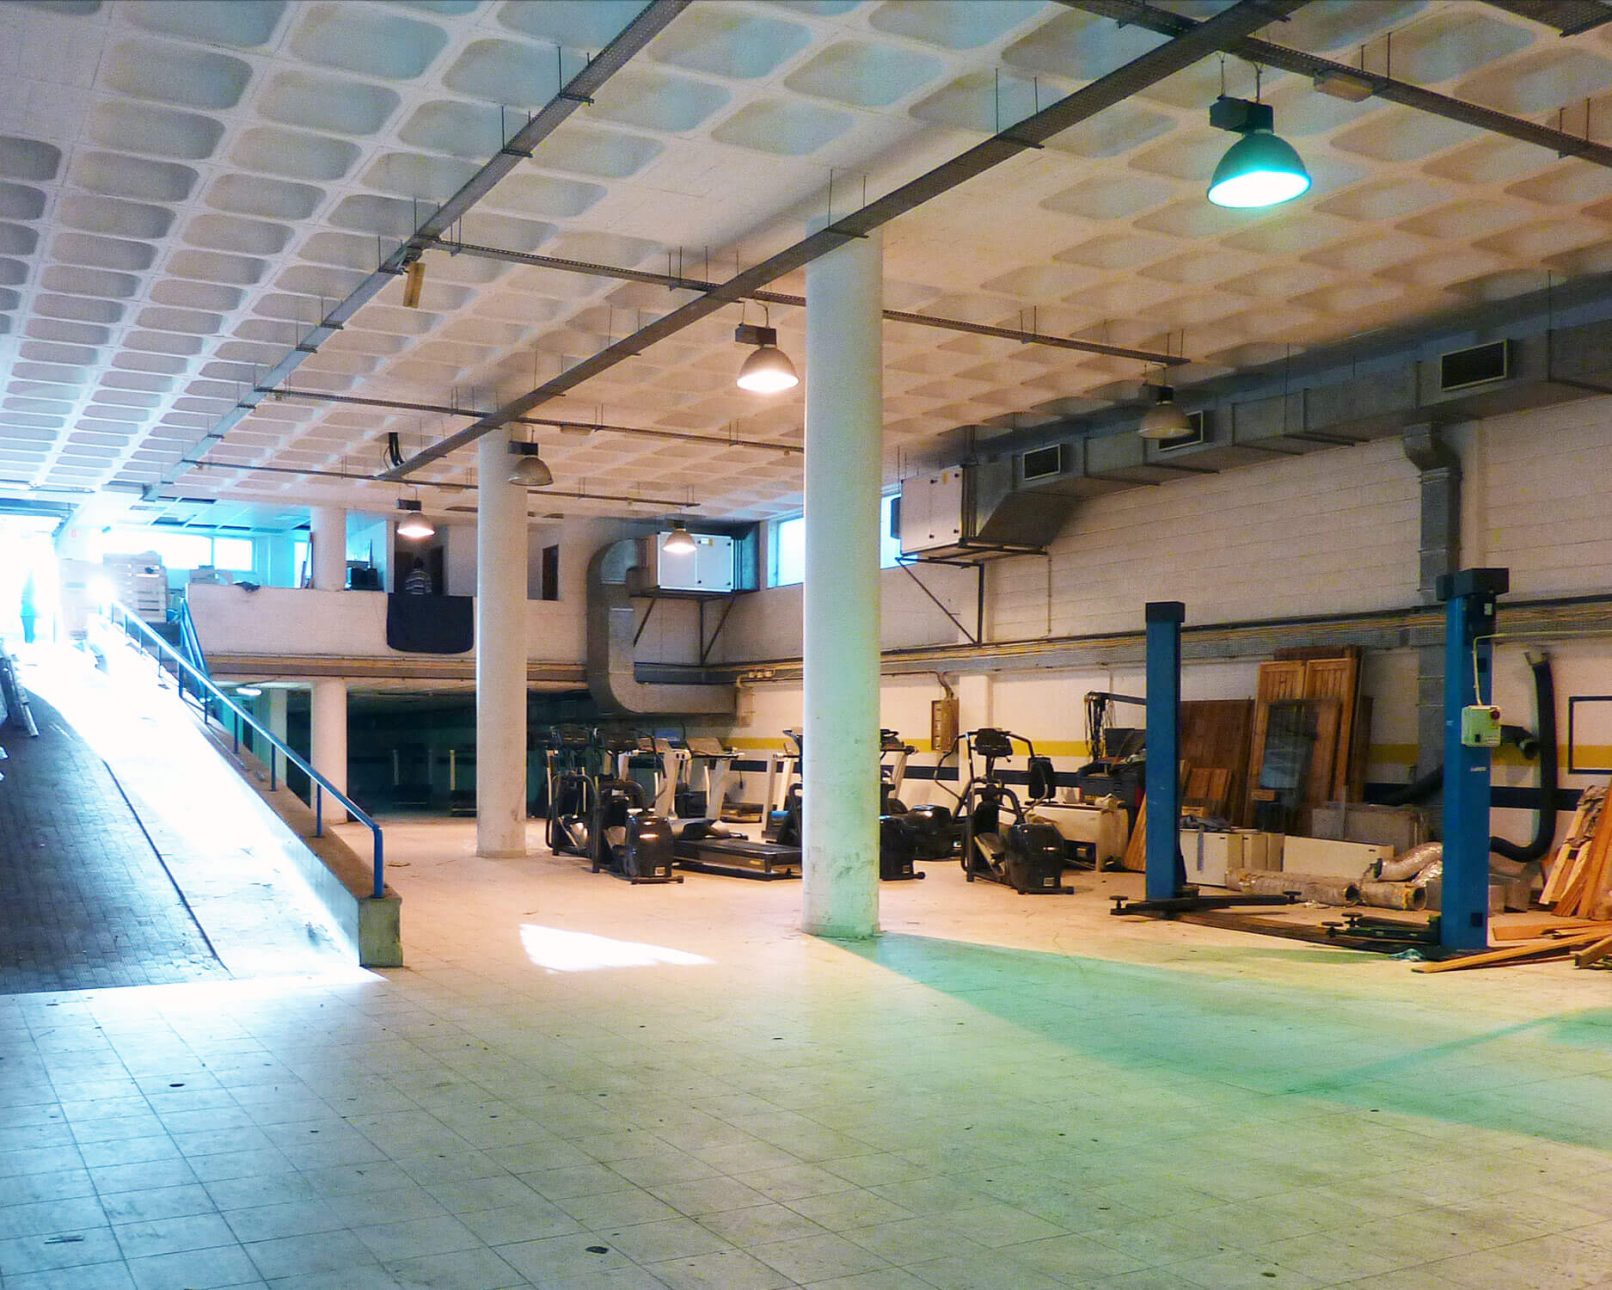 Image of the space before its conversion into a crossfit box.